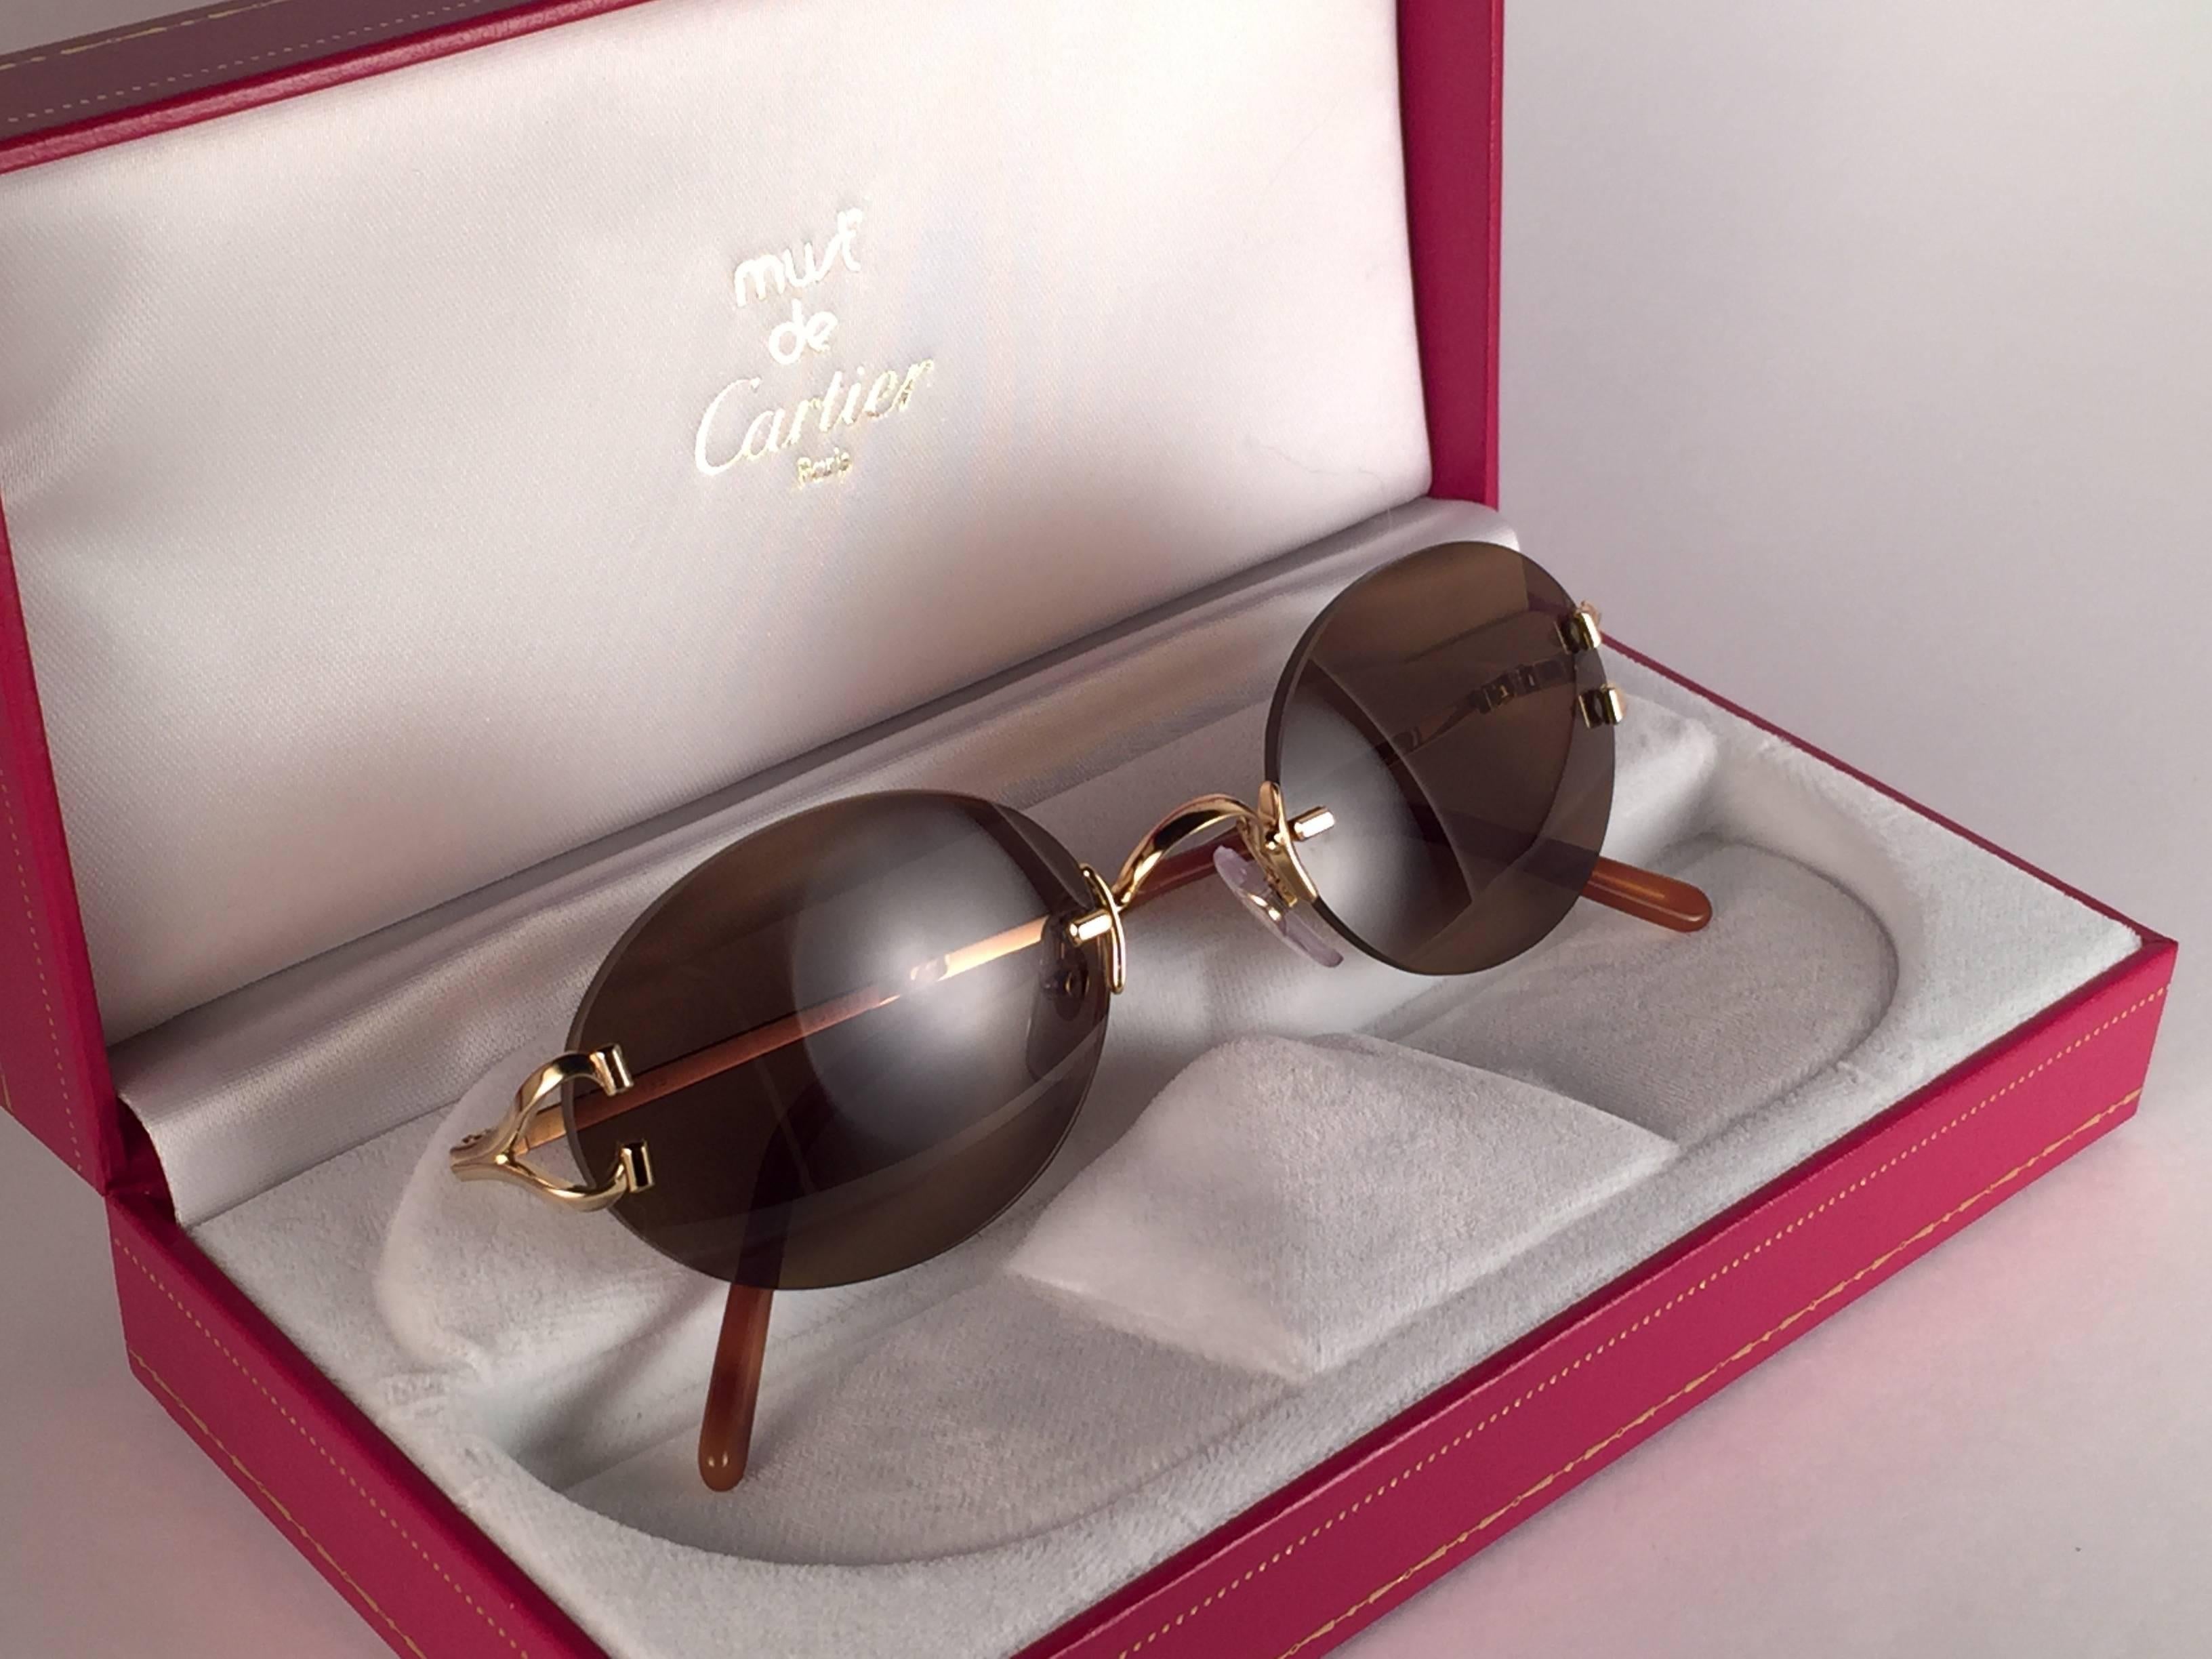 New 1990 Cartier Scala unique rimless sunglasses with brown  (uv protection) lenses. Frame with the front and sides in gold. All hallmarks. Cartier gold signs on the honey ear paddles. These are like a pair of jewels on your nose. Beautiful design